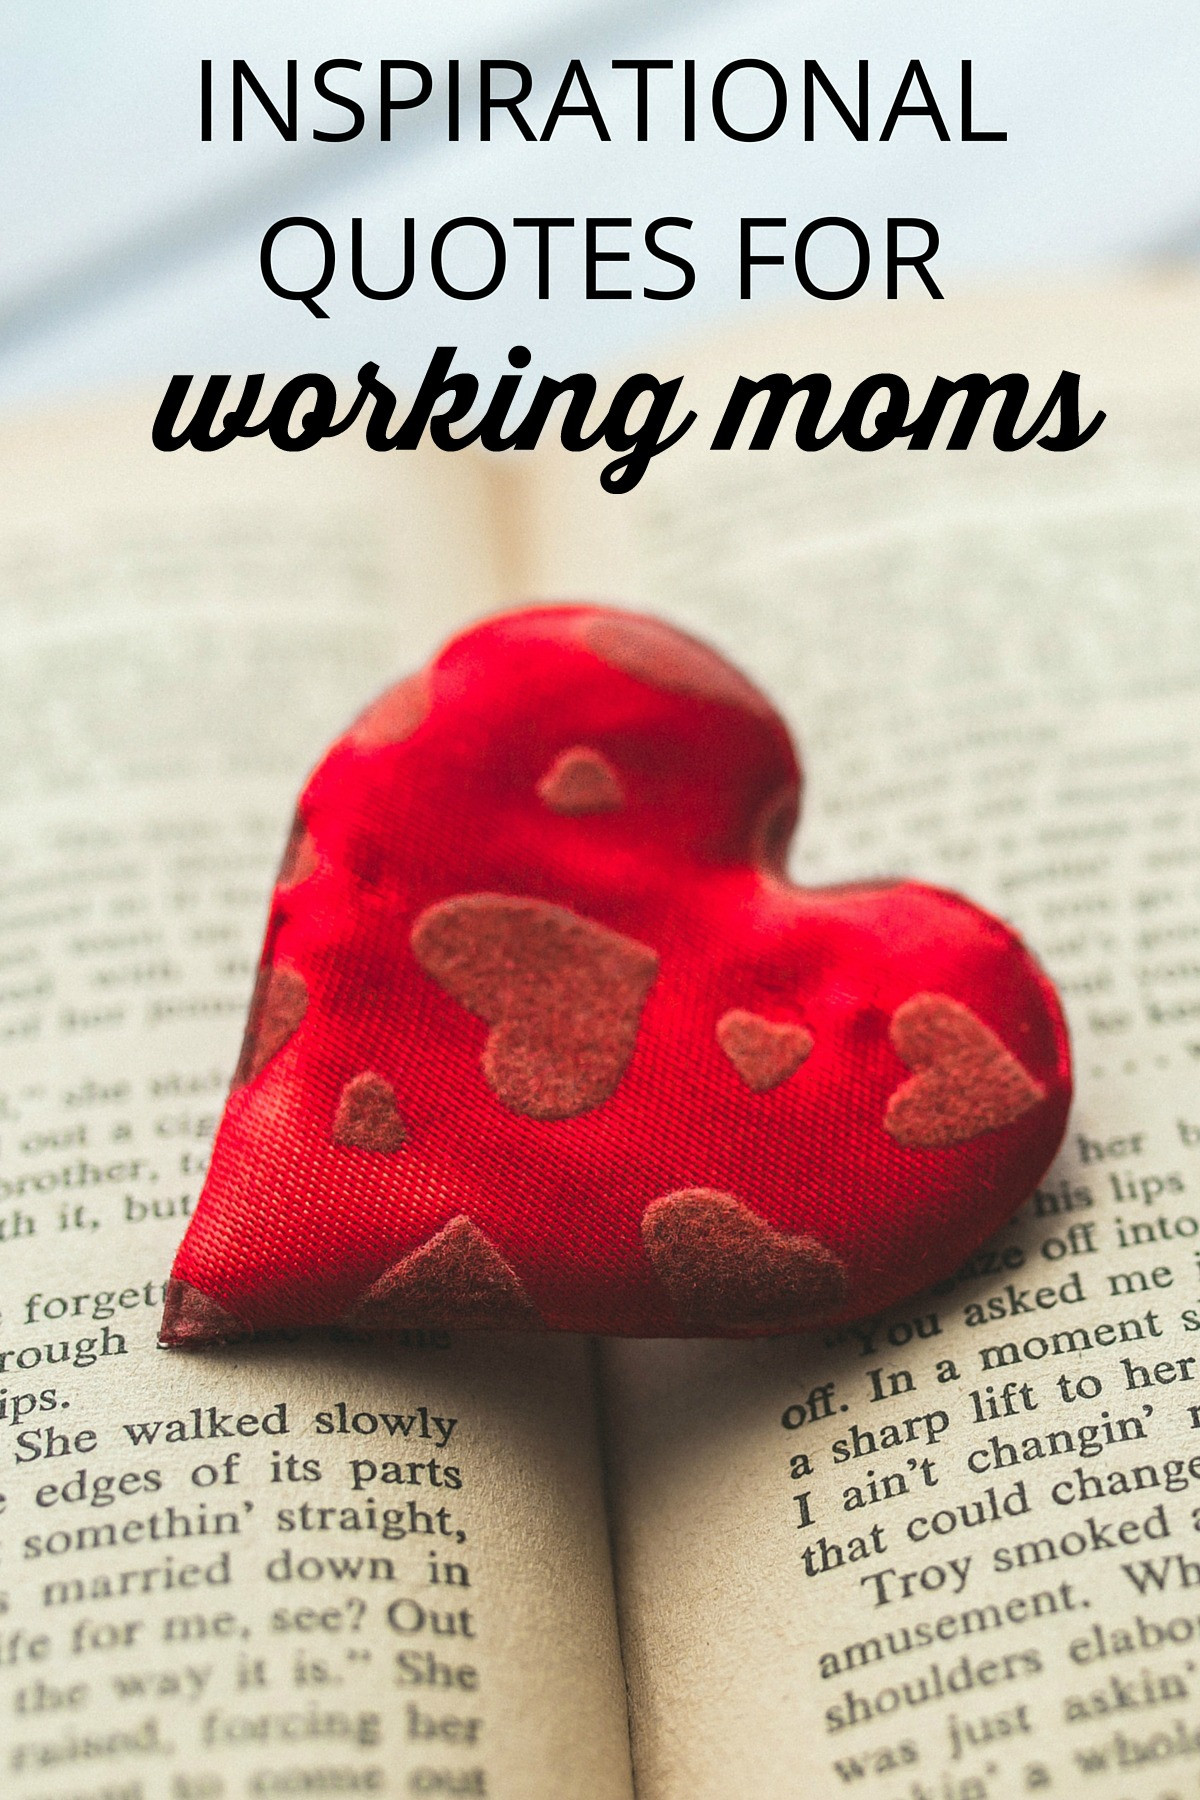 Mothers Inspirational Quotes
 Inspirational Quotes for Working Moms